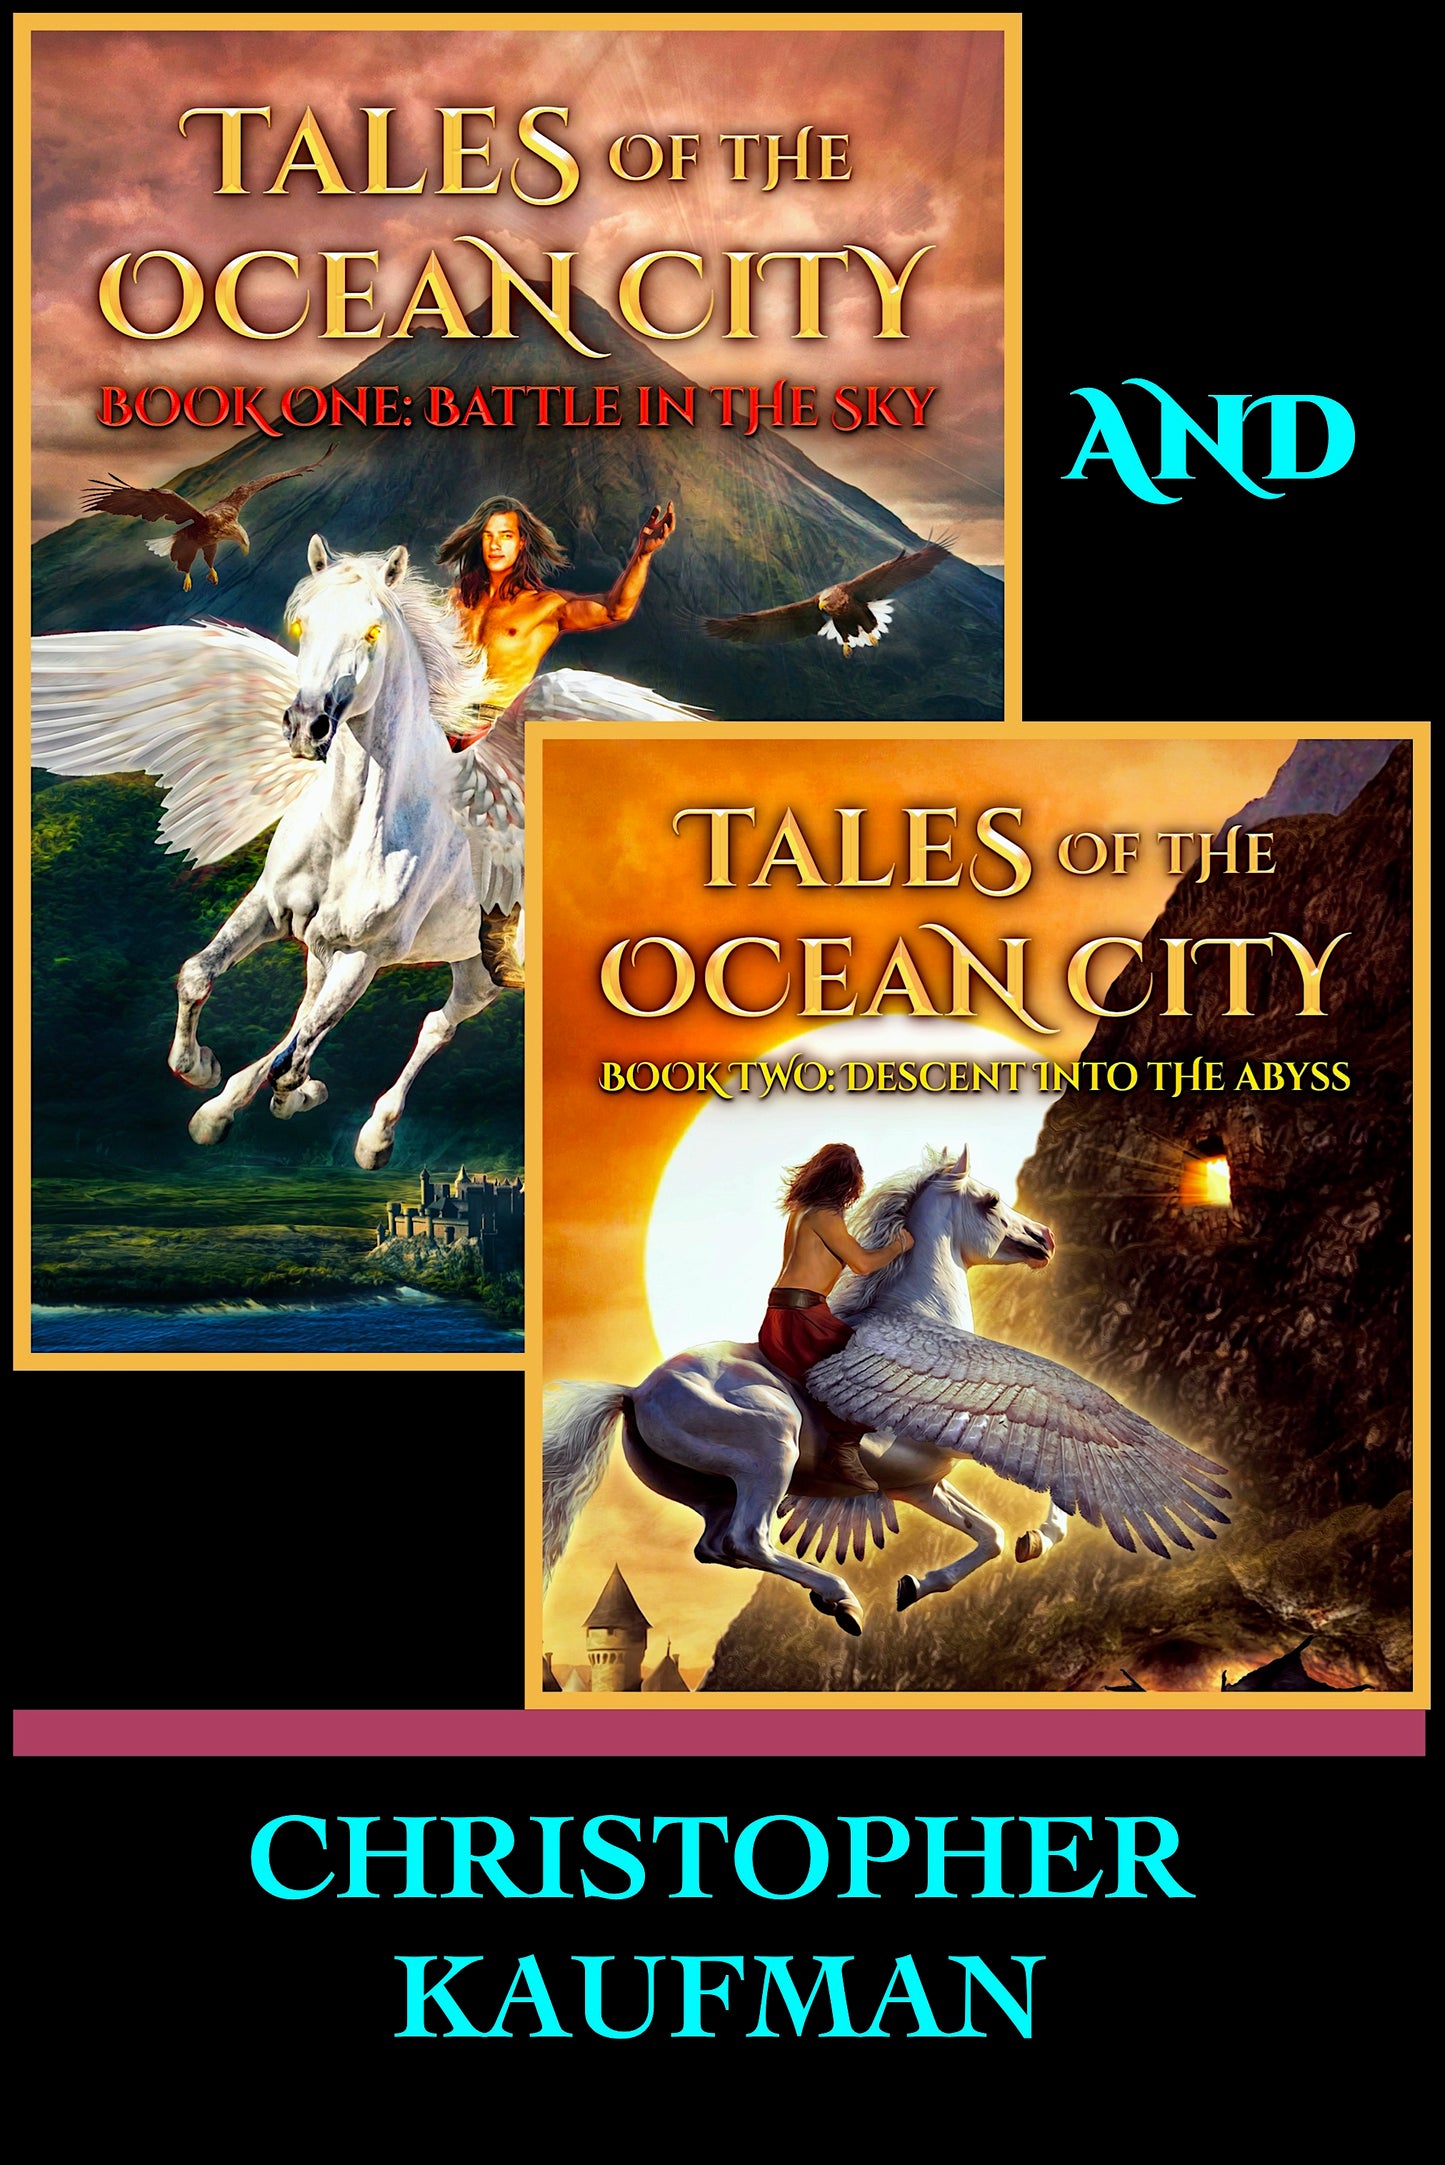 TALES OF THE OCEAN CITY - Book One: Battle In The Sky